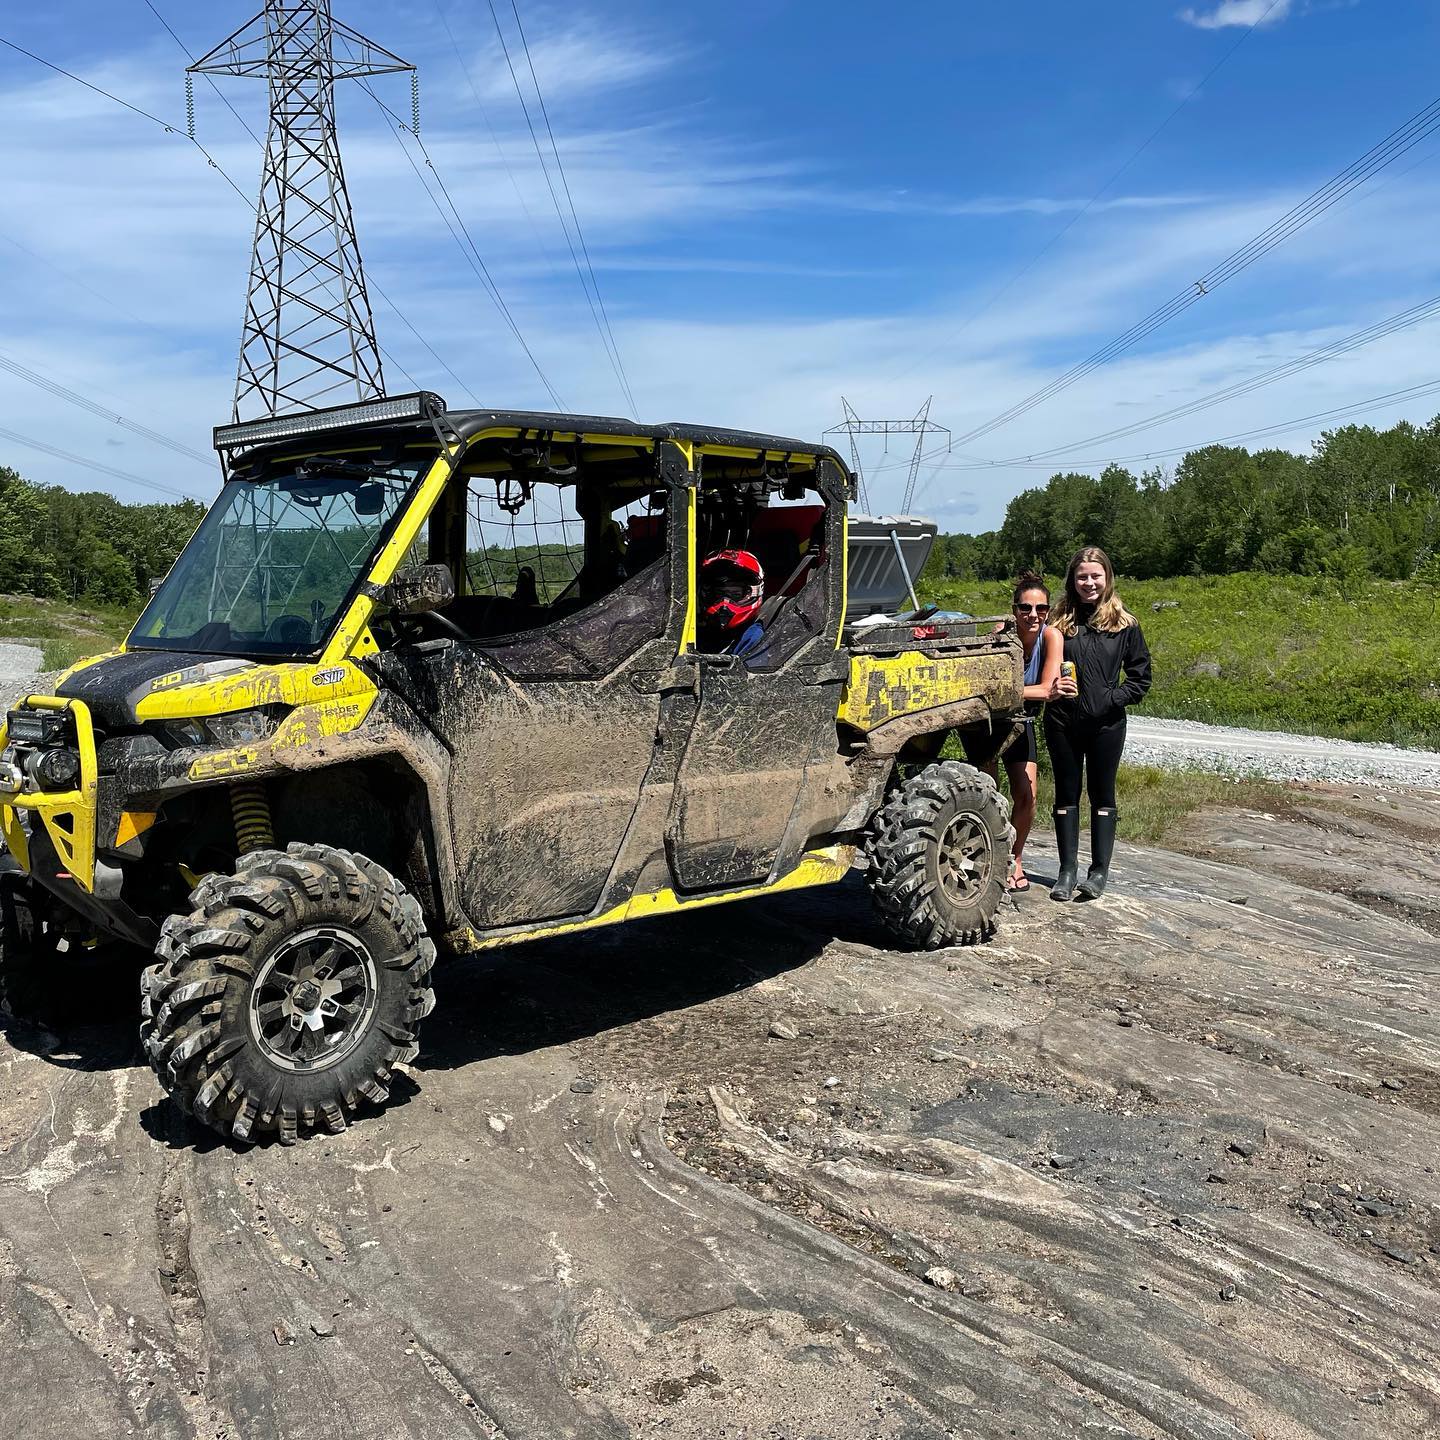 #outforarip beautiful day for a ride #defenderxmr #swampdonkeys